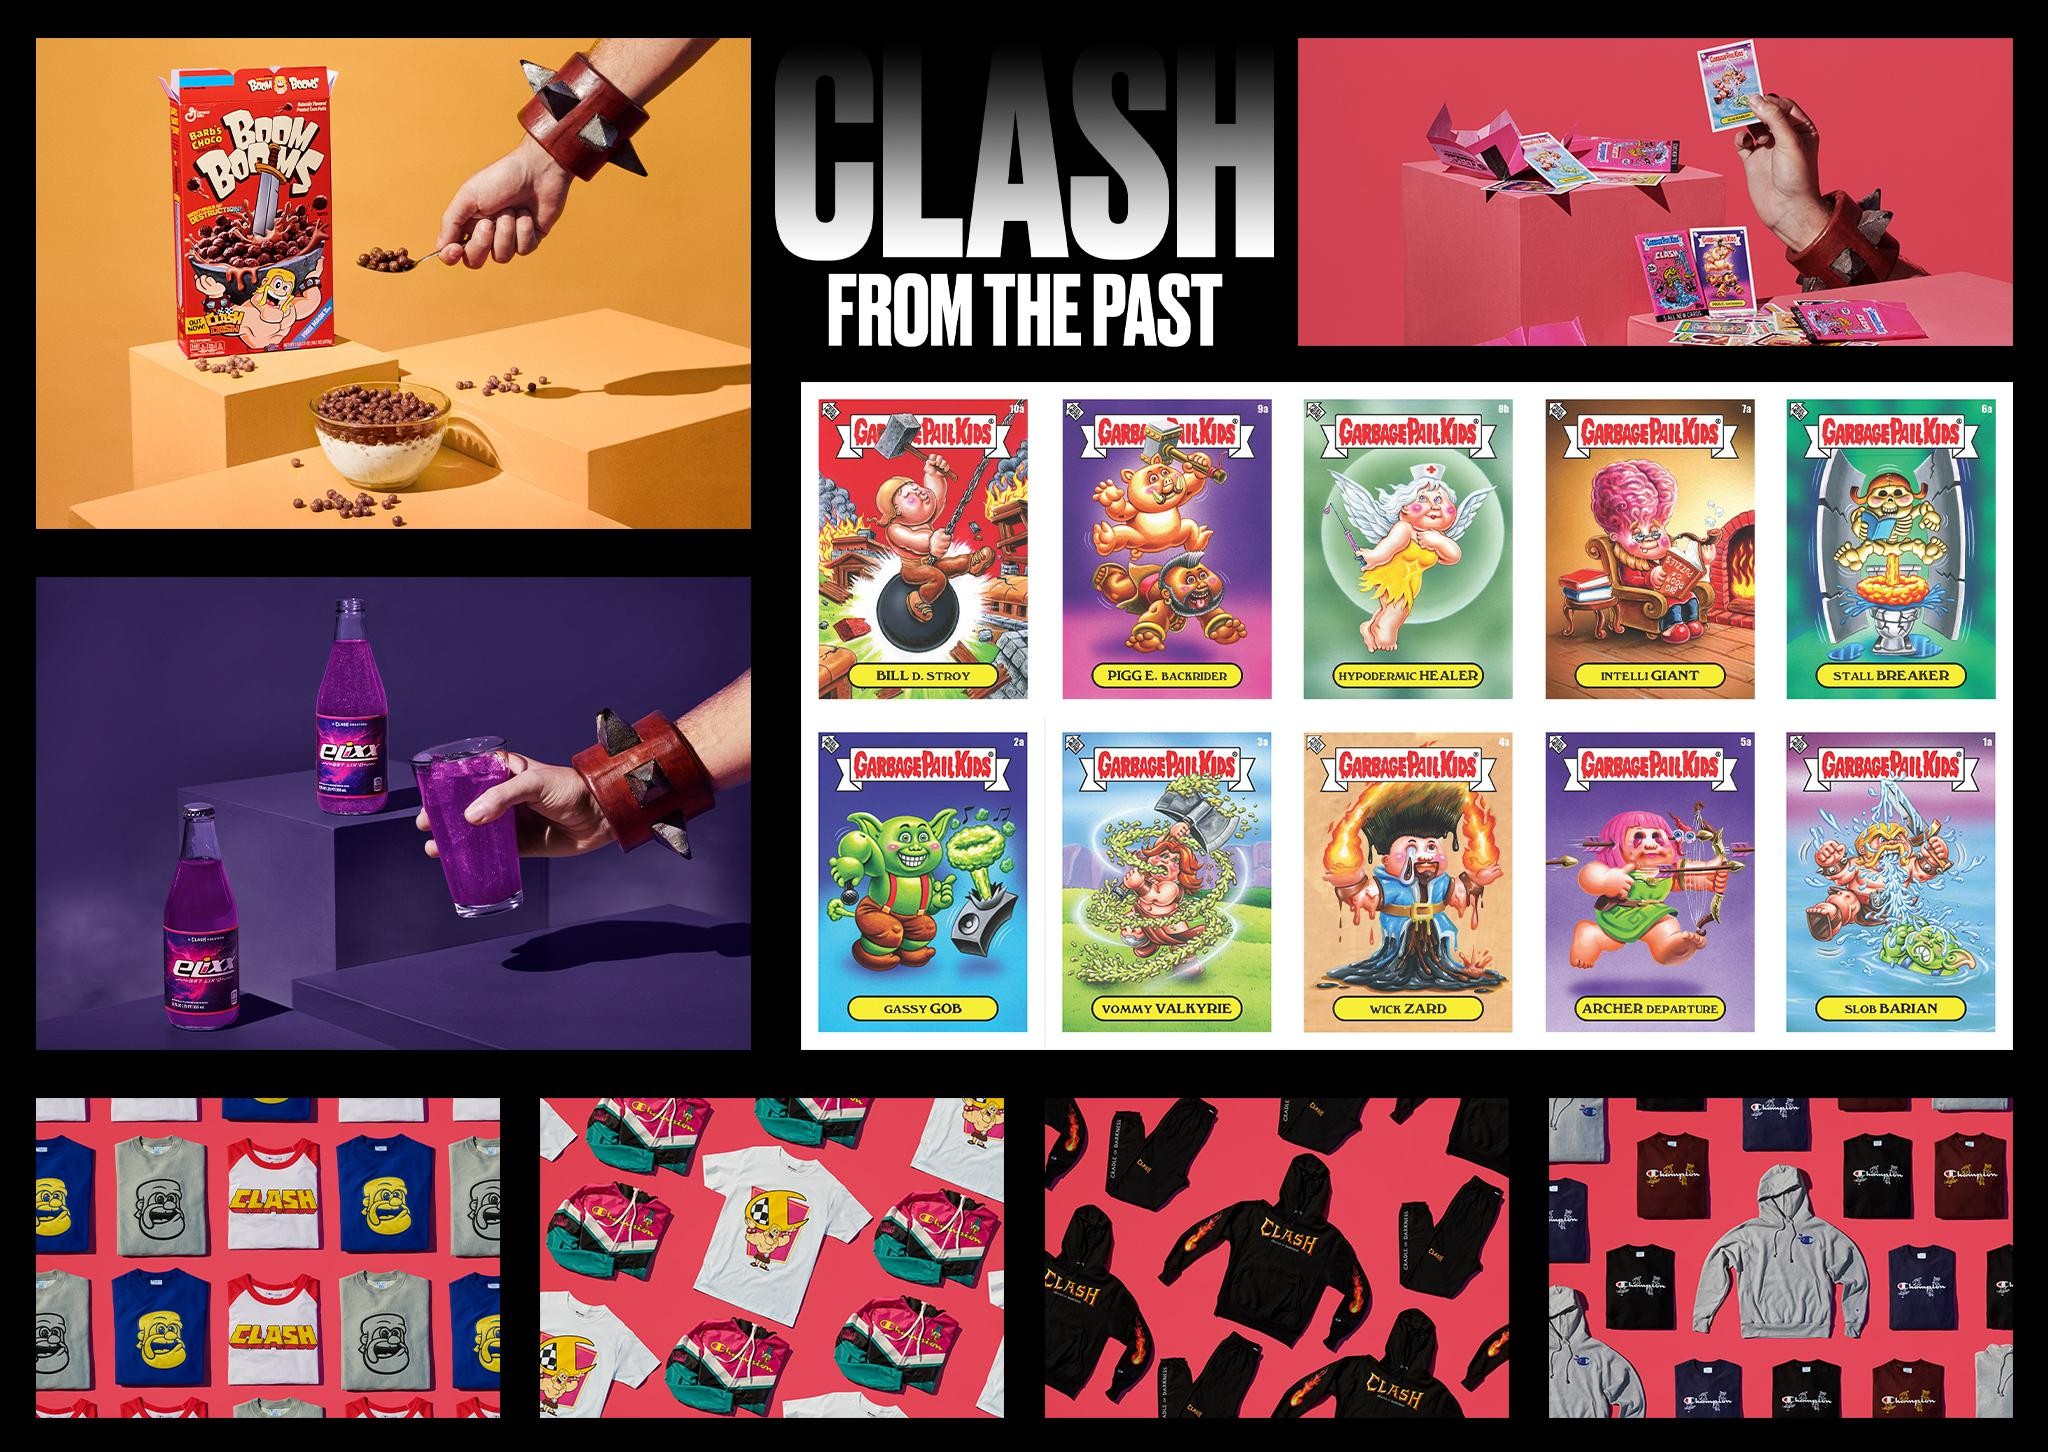 CLASH FROM THE PAST